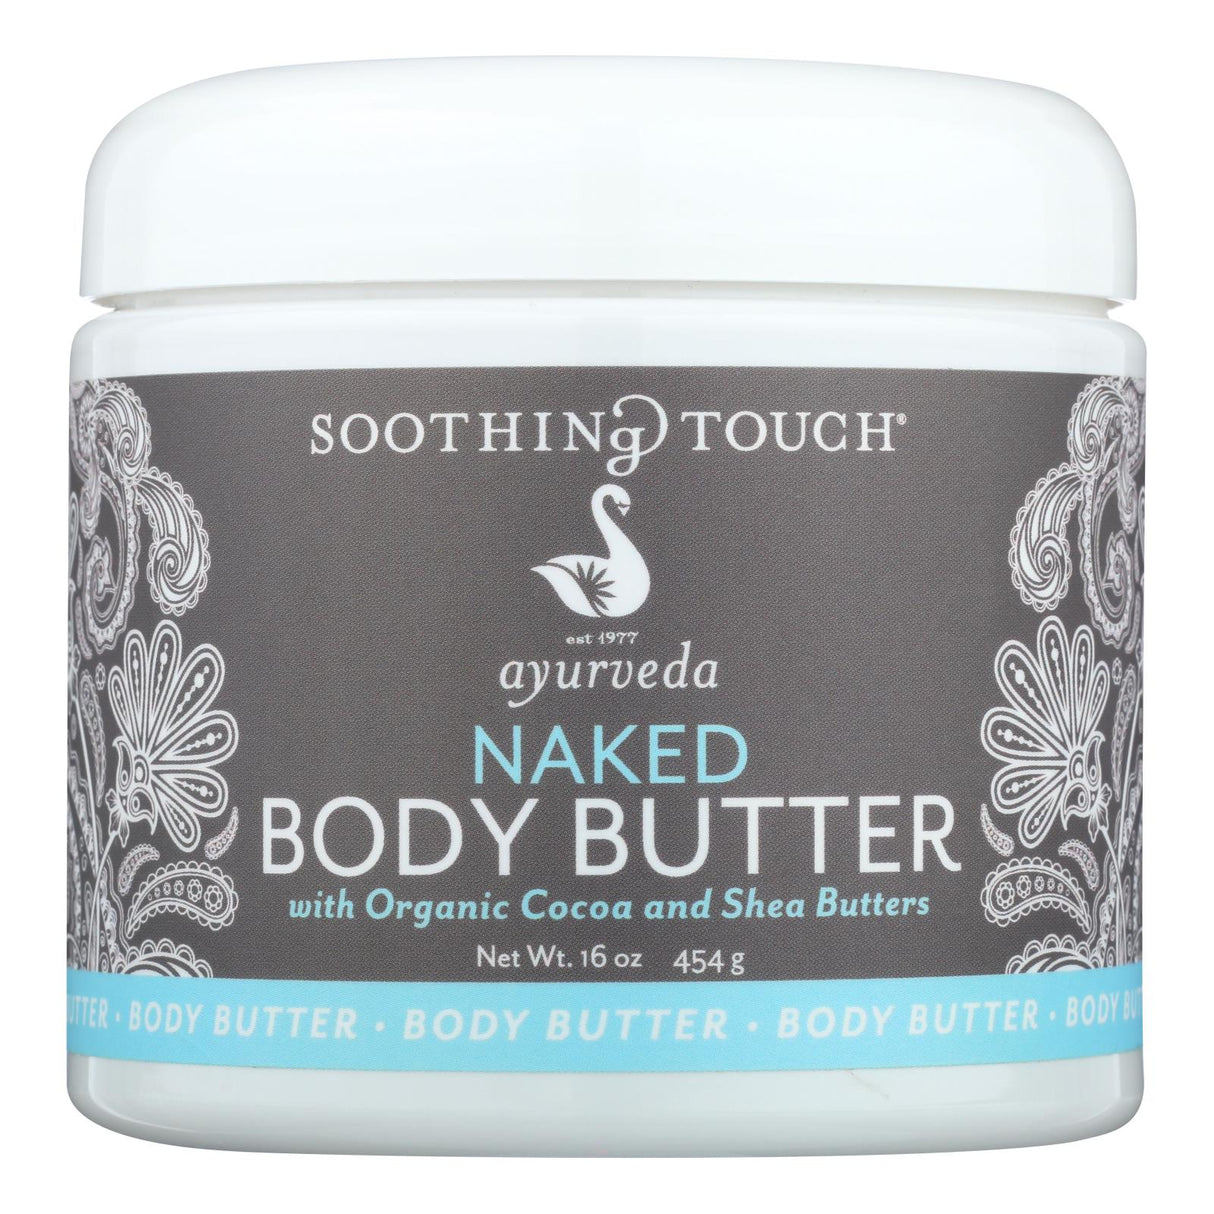 Soothing Touch Naked Body Butter, 13 Oz - Cozy Farm 